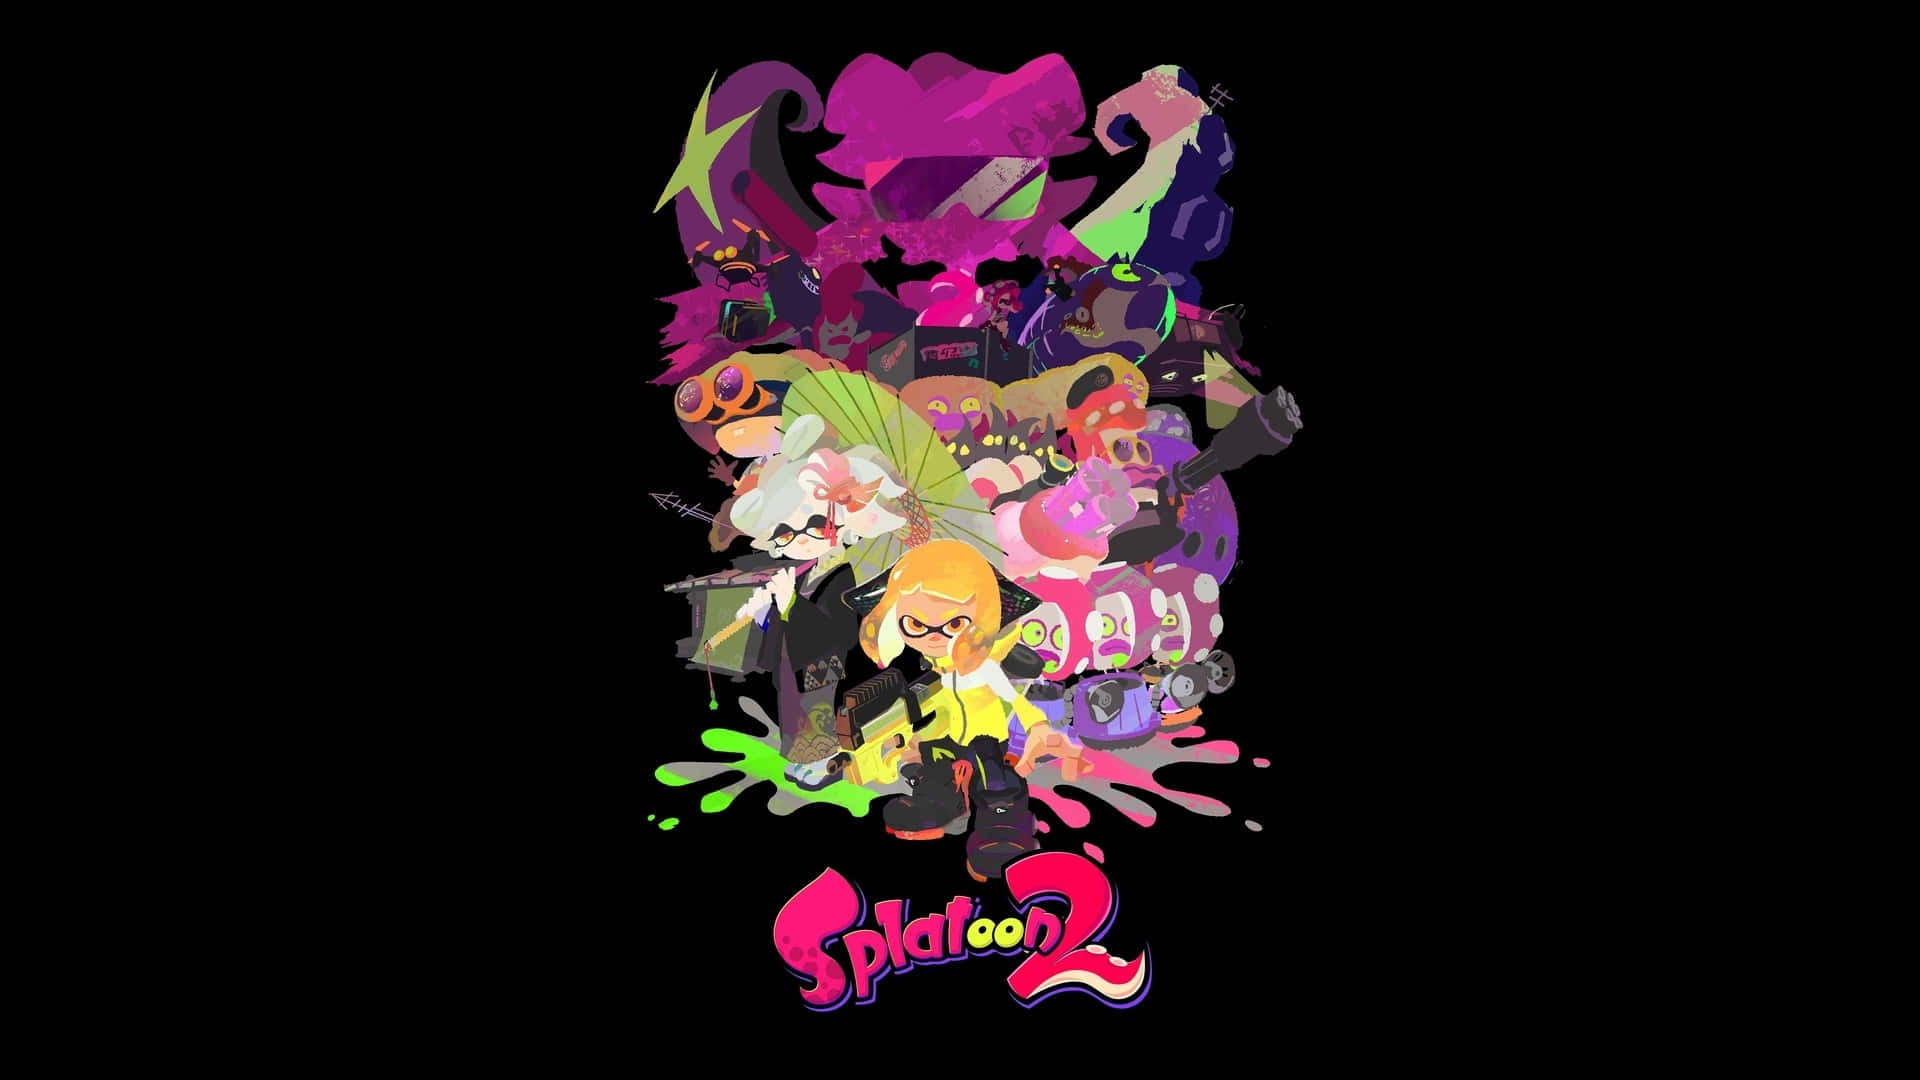 “Add Some Color to Your Life with Splatoon”